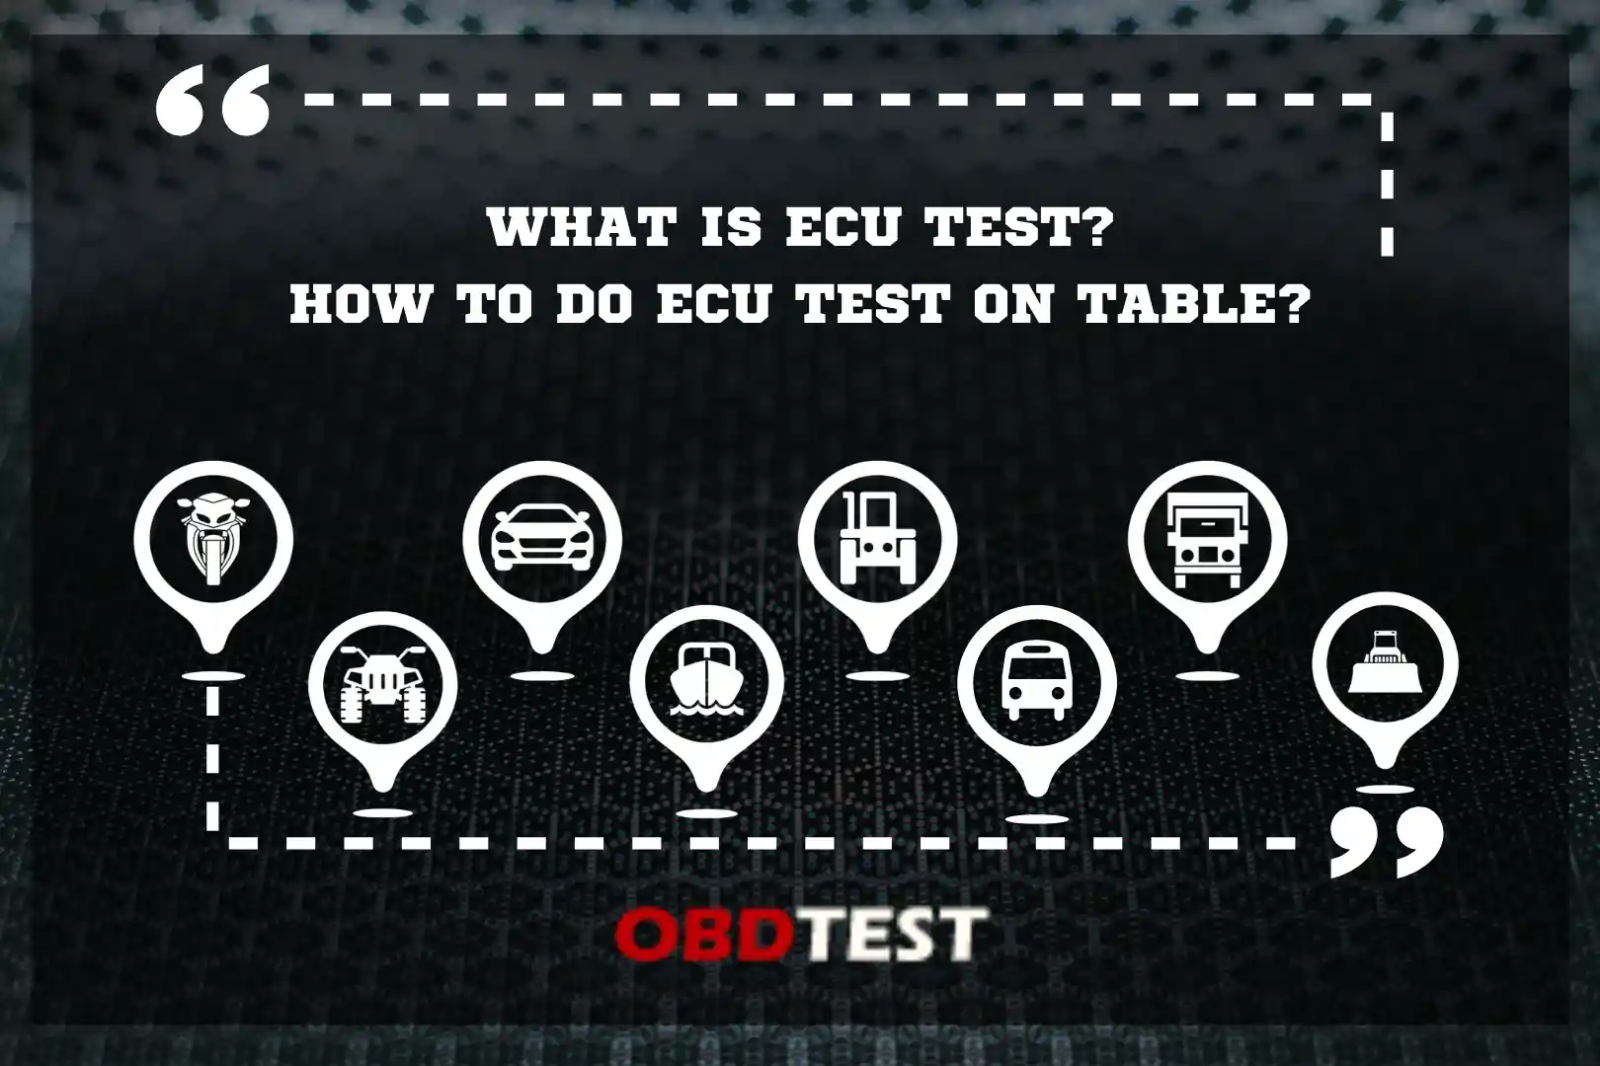 What is ECU Test? How to do ECU Test on table?